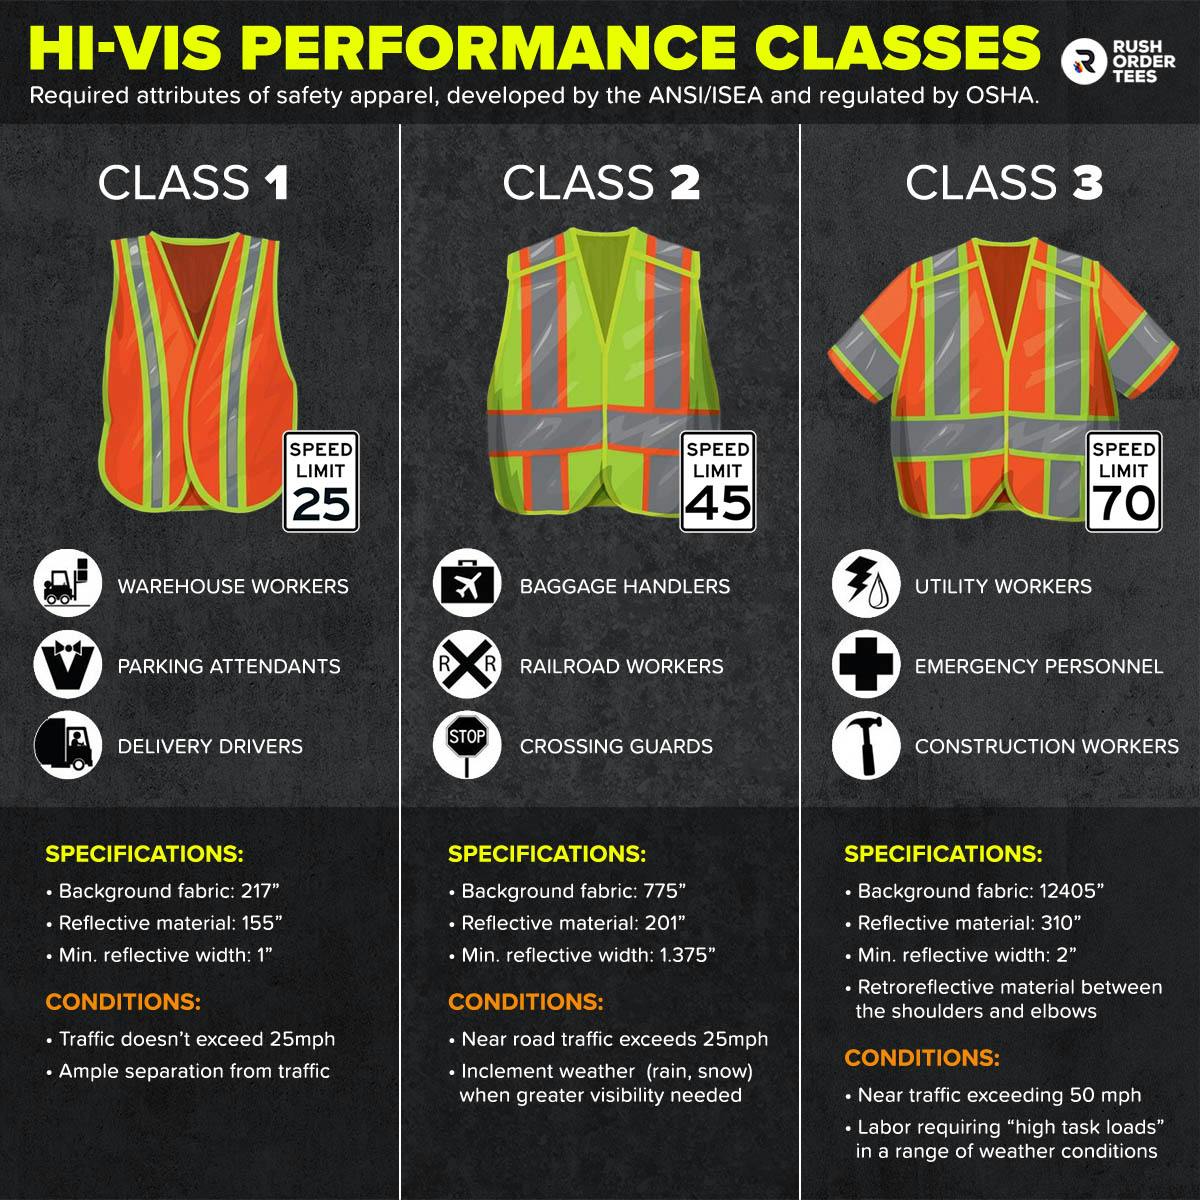 High-visibility saety apparel performance classes